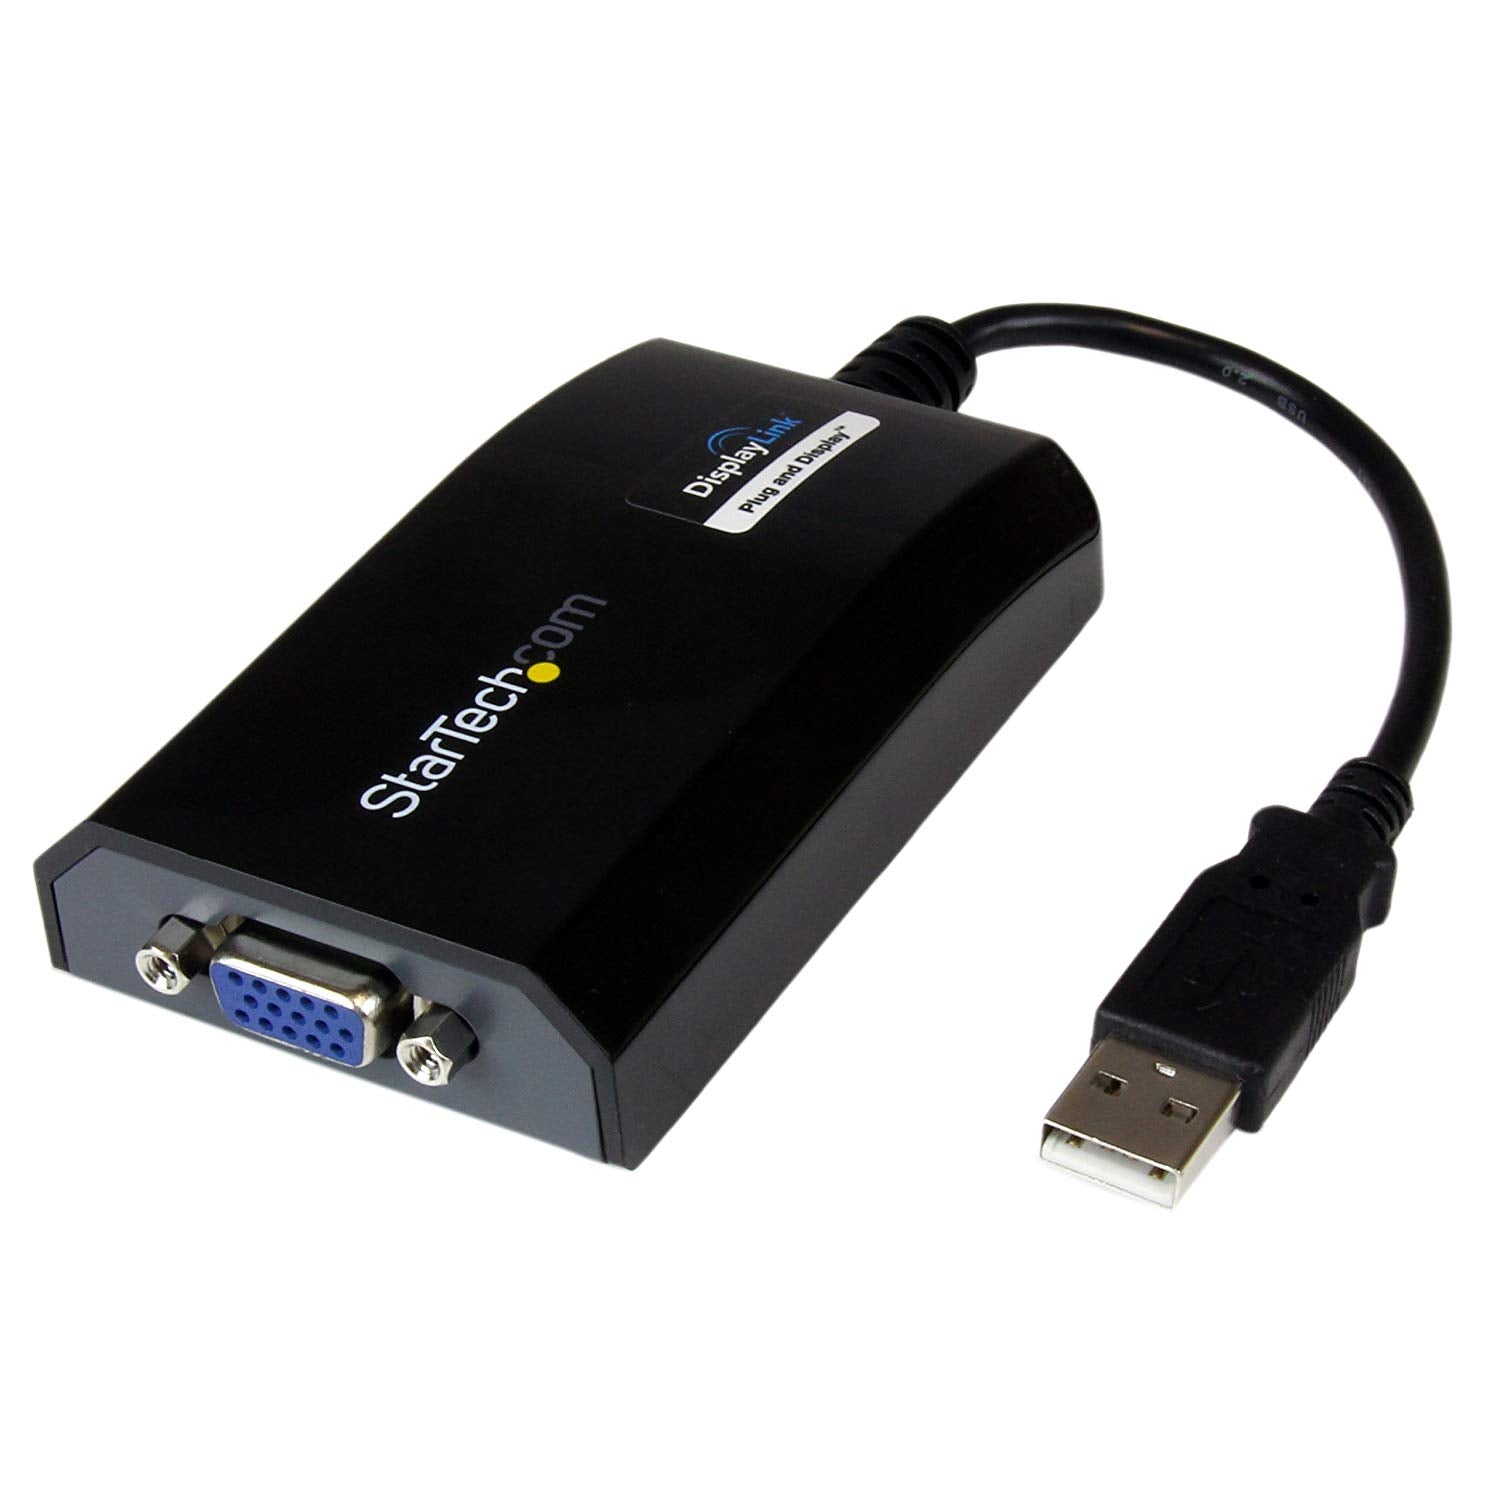 STARTECH USB to VGA Adapter External USB Video Graphics Card for PC and MAC 1920 x1200 (USB2VGAPR02 New)